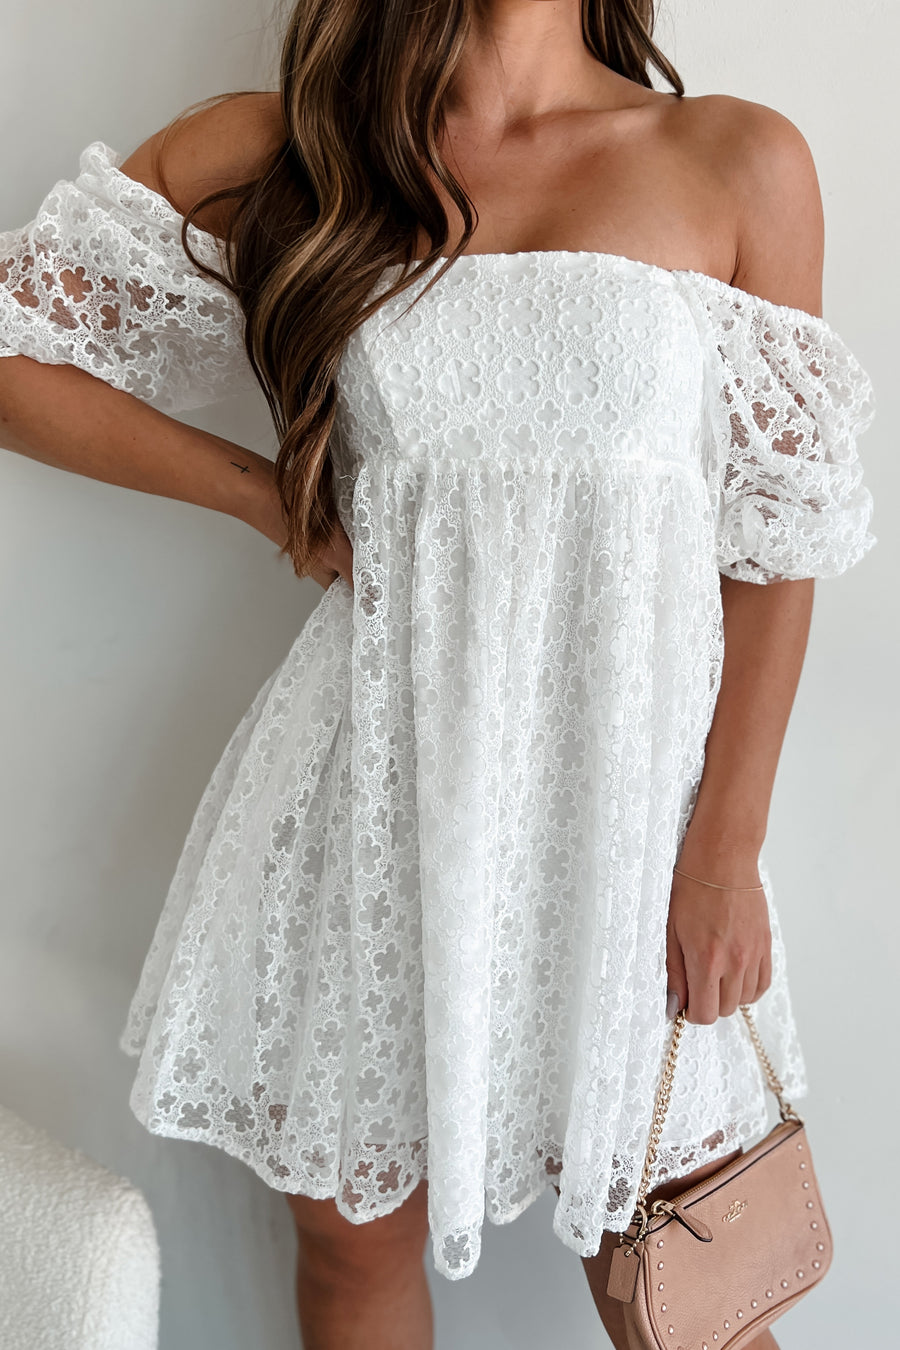 Simply Fetching Lace Mini Dress (White Floral)